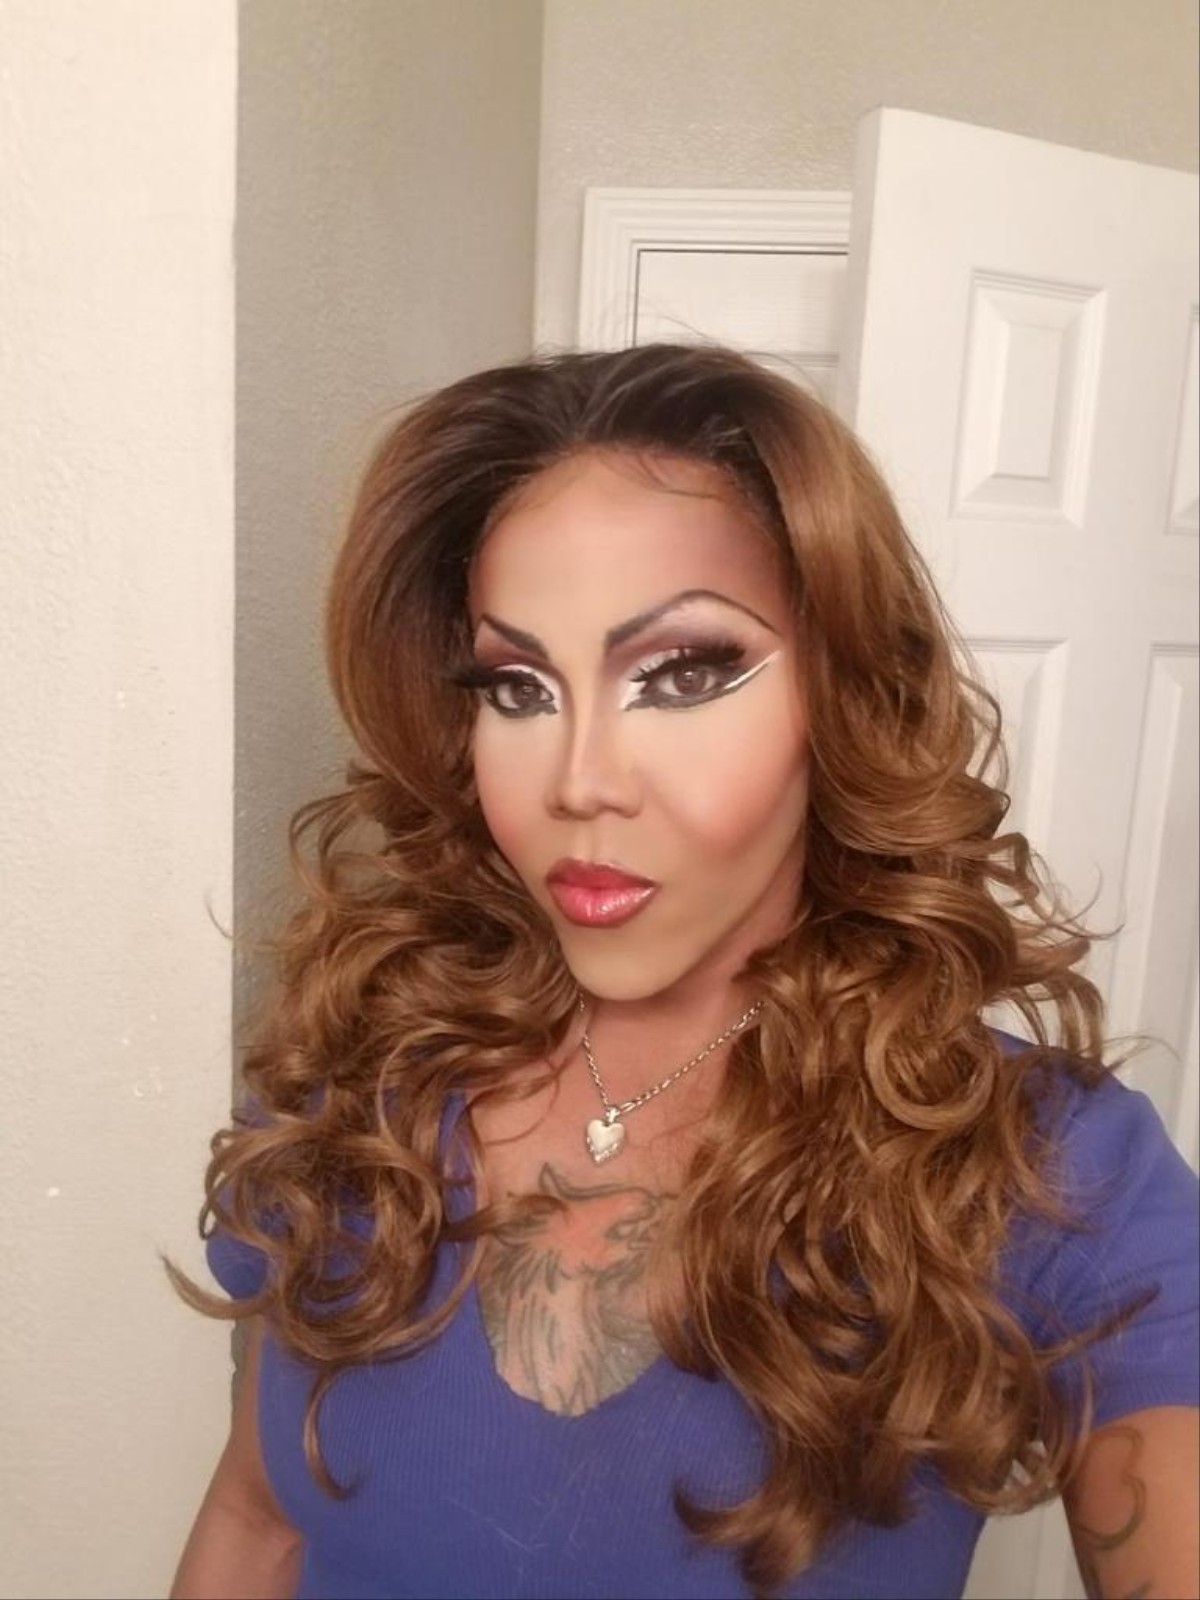 With Limited Health Care Access, Some Trans Women Turn To Silicone